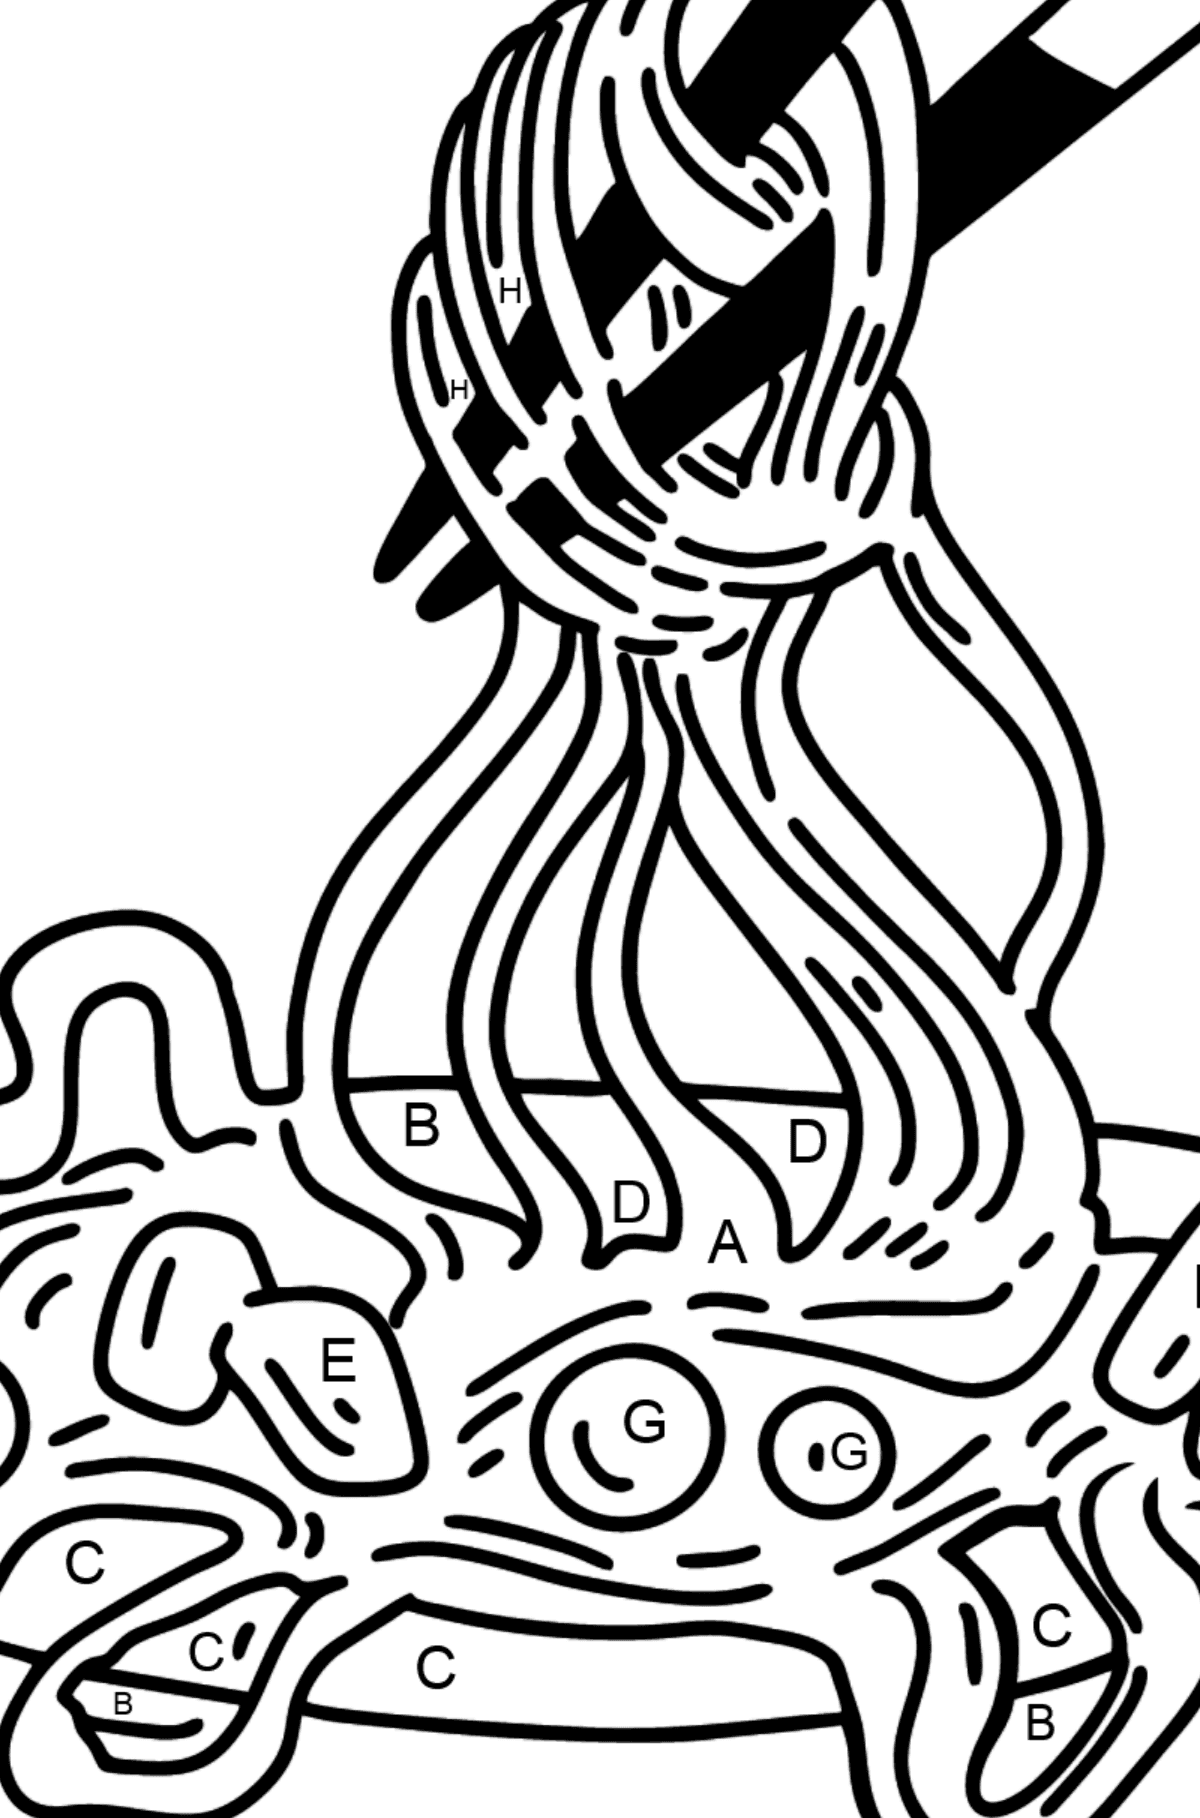 Ramen coloring page - Coloring by Letters for Kids